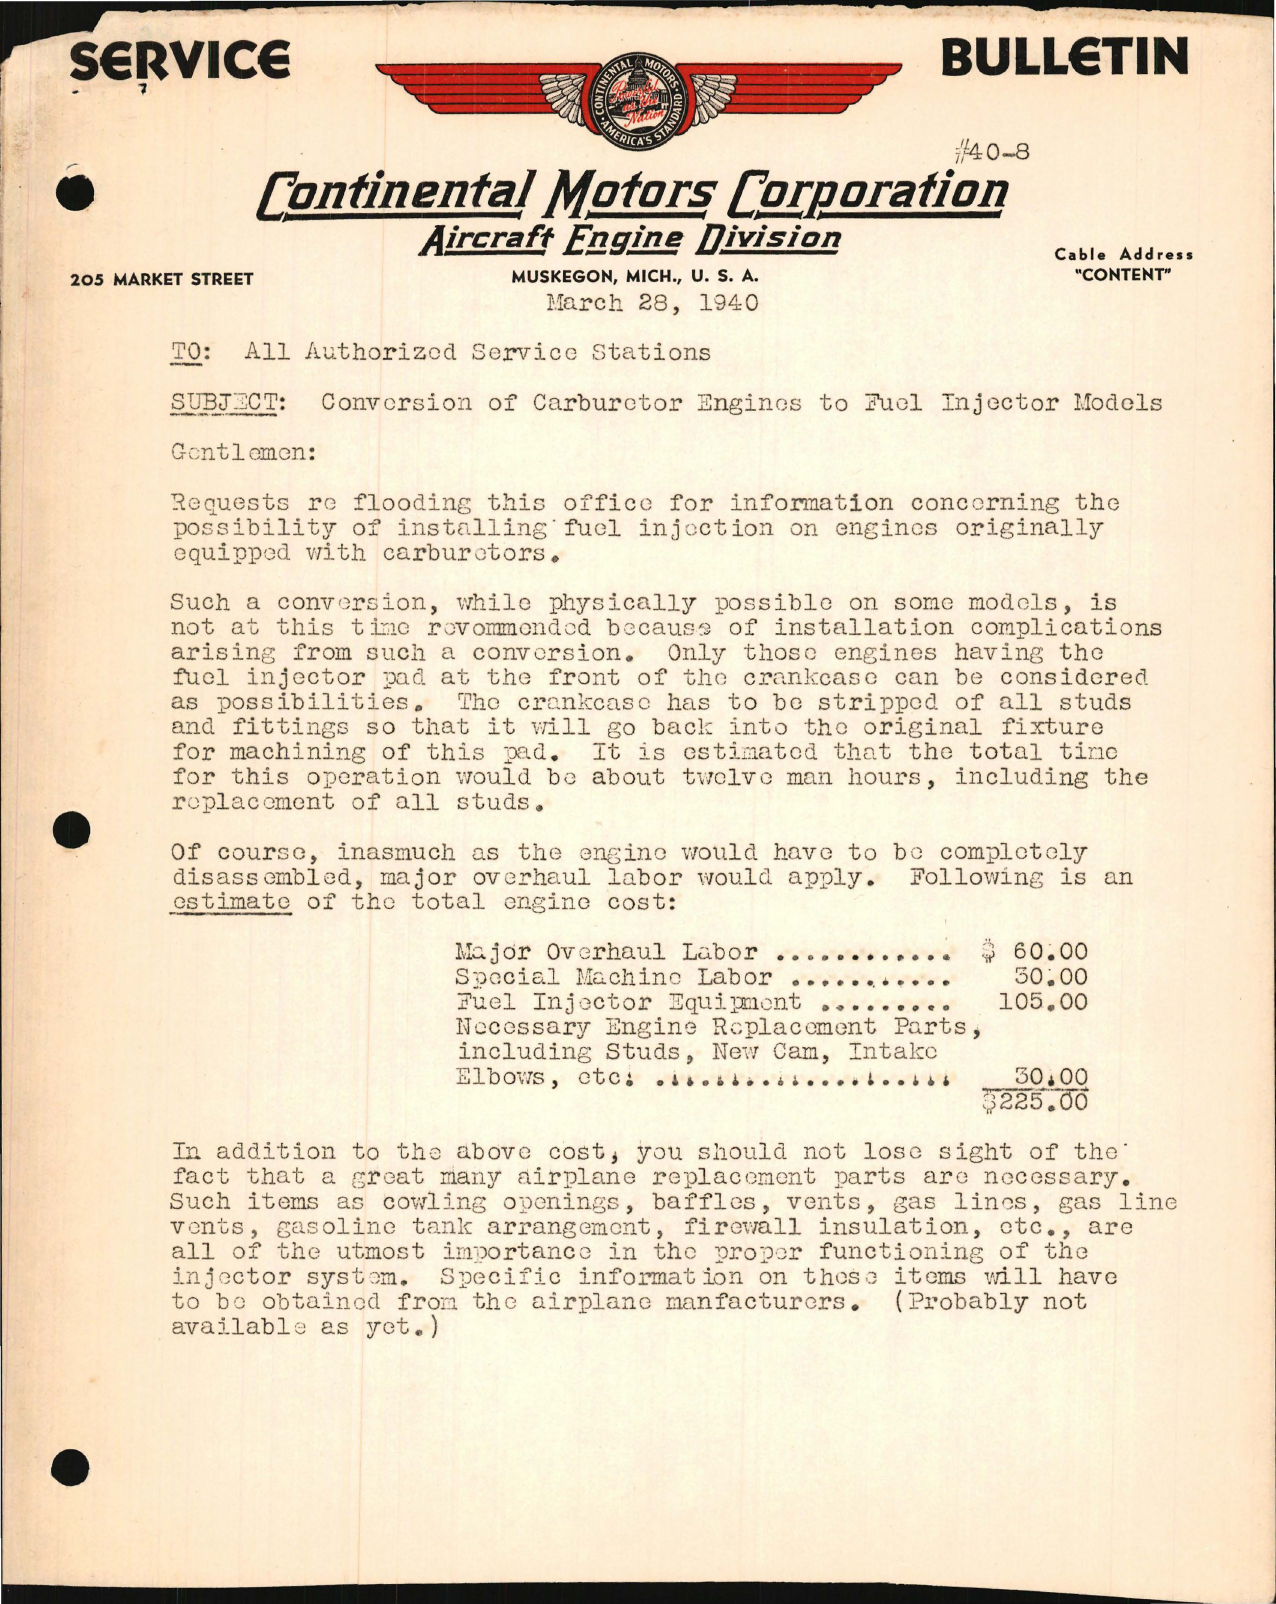 Sample page 1 from AirCorps Library document: Conversion of Carburetor Engines to Fuel Injector Models